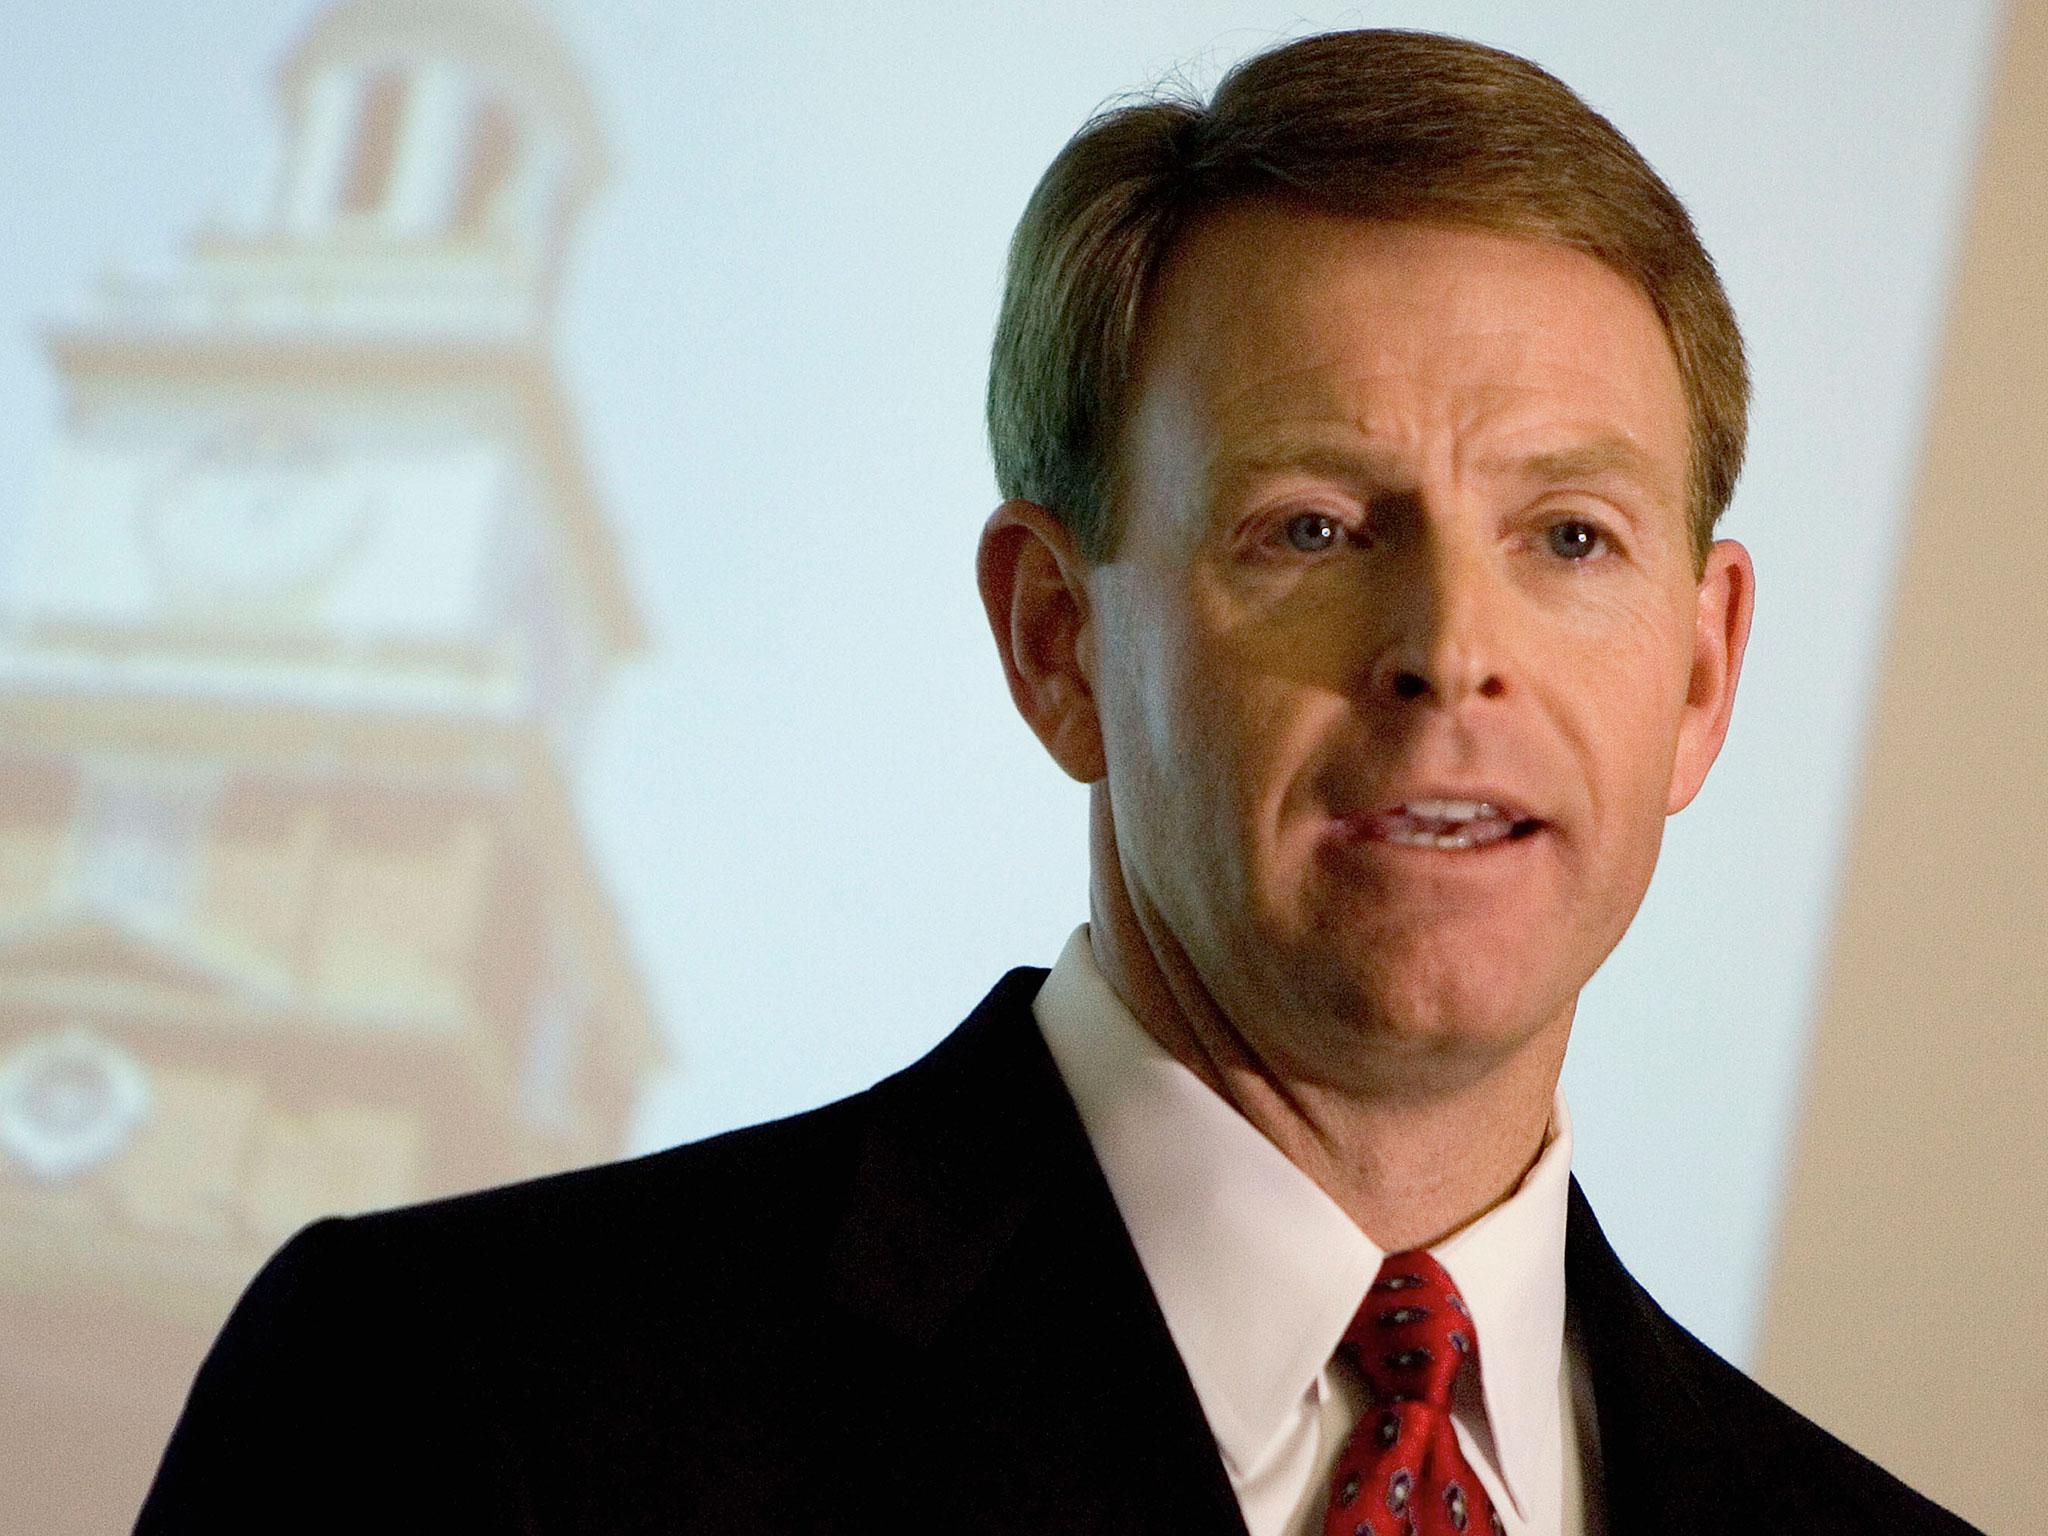 Tony Perkins, president of the Family Research Council, said the allegation would 'not be ignored nor swept aside'